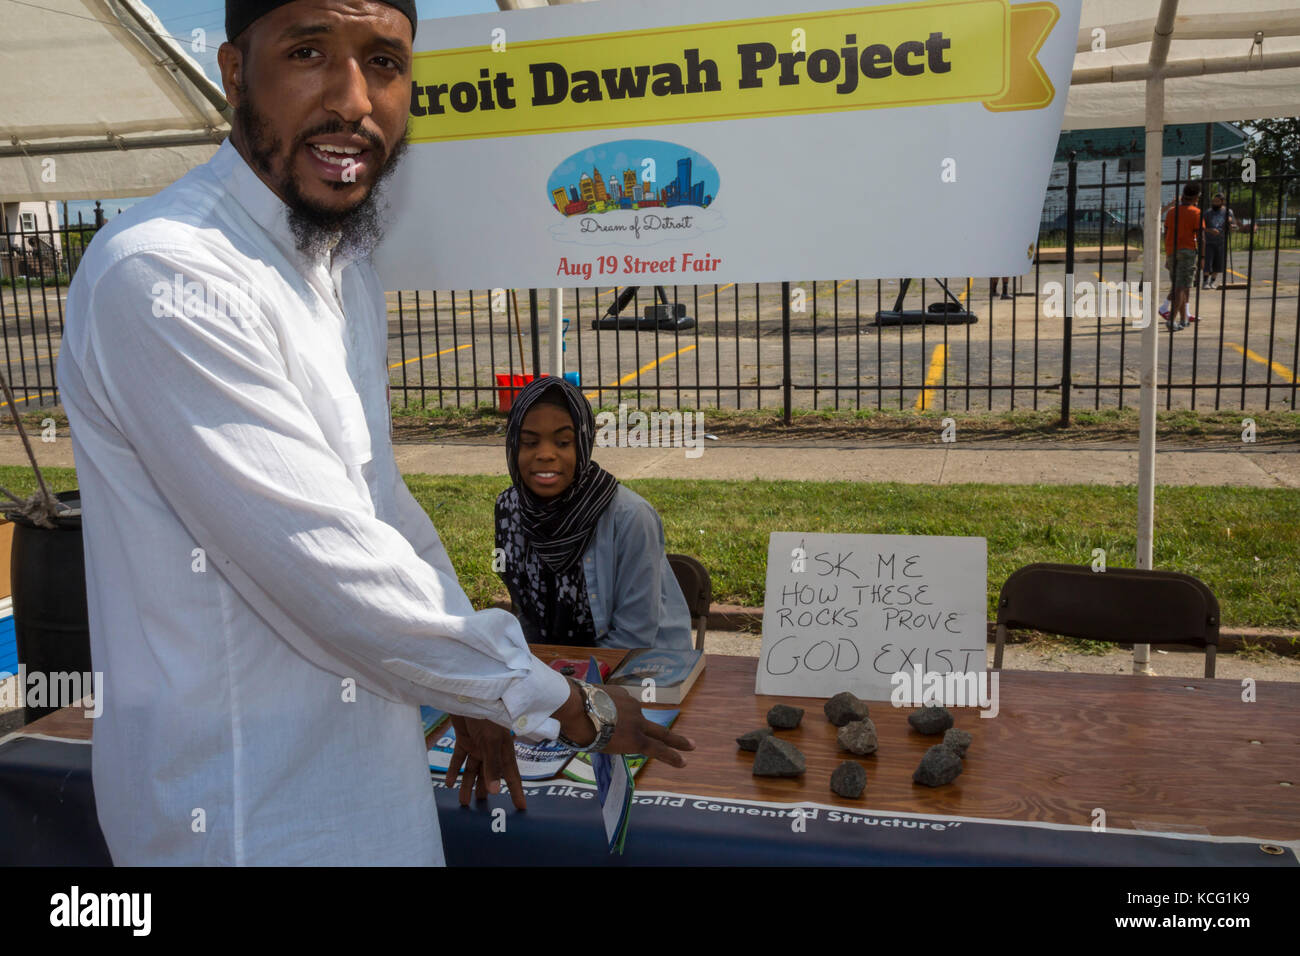 Detroit, Michigan - A man discusses religion at the Dream of Detroit street fair. He is affiliated with the Dawah Project, a nonprofit Islamic educati Stock Photo